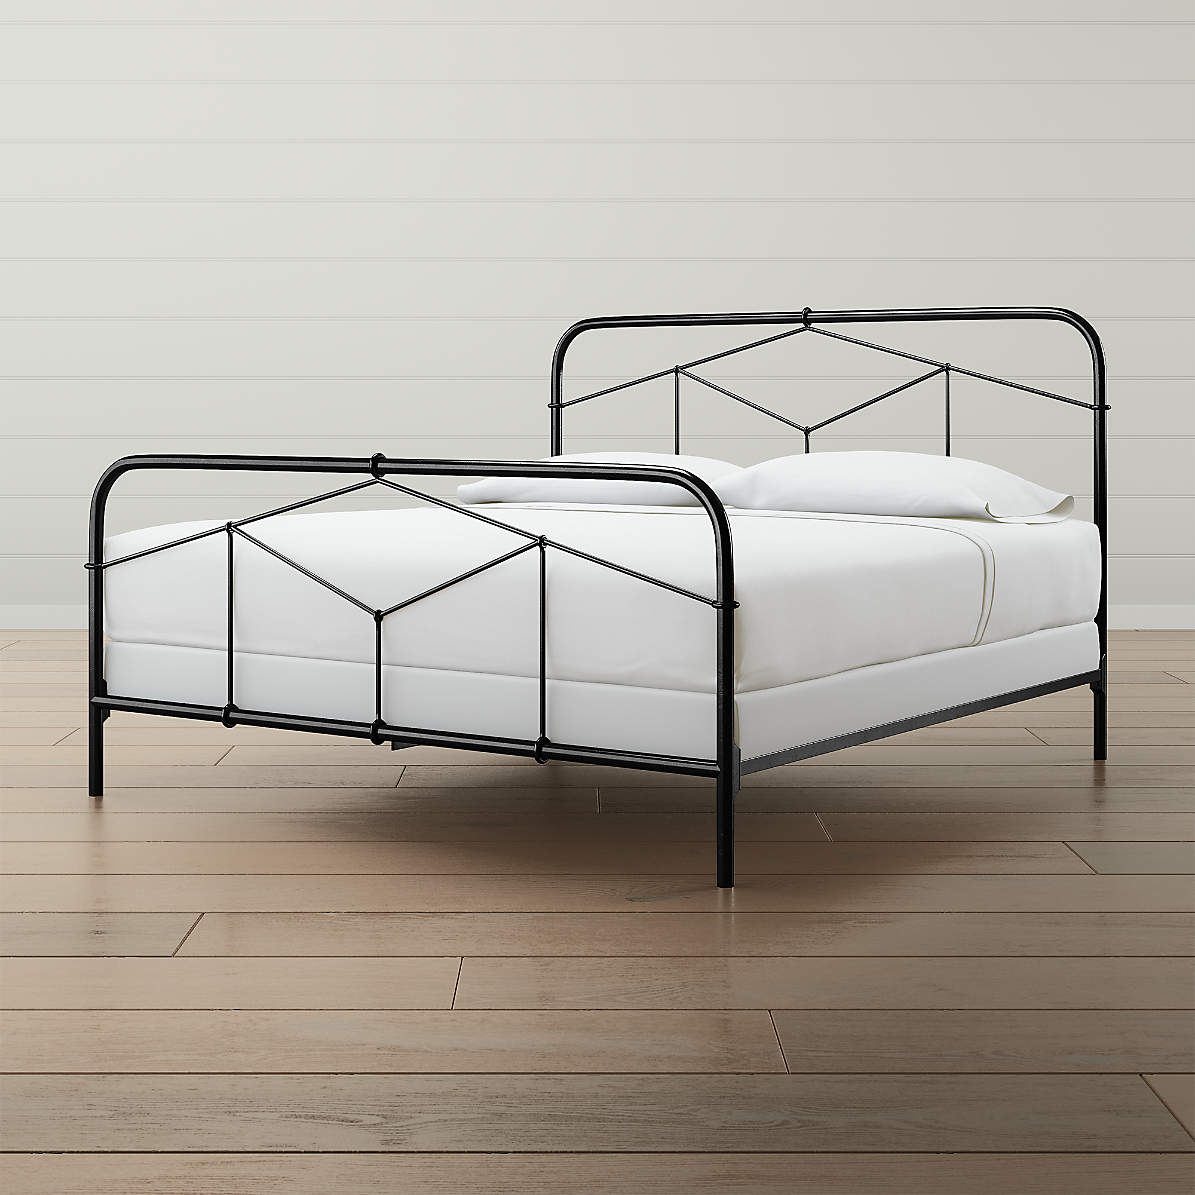 Cora King Black Iron Bed Reviews, King Size Iron Bed Frame